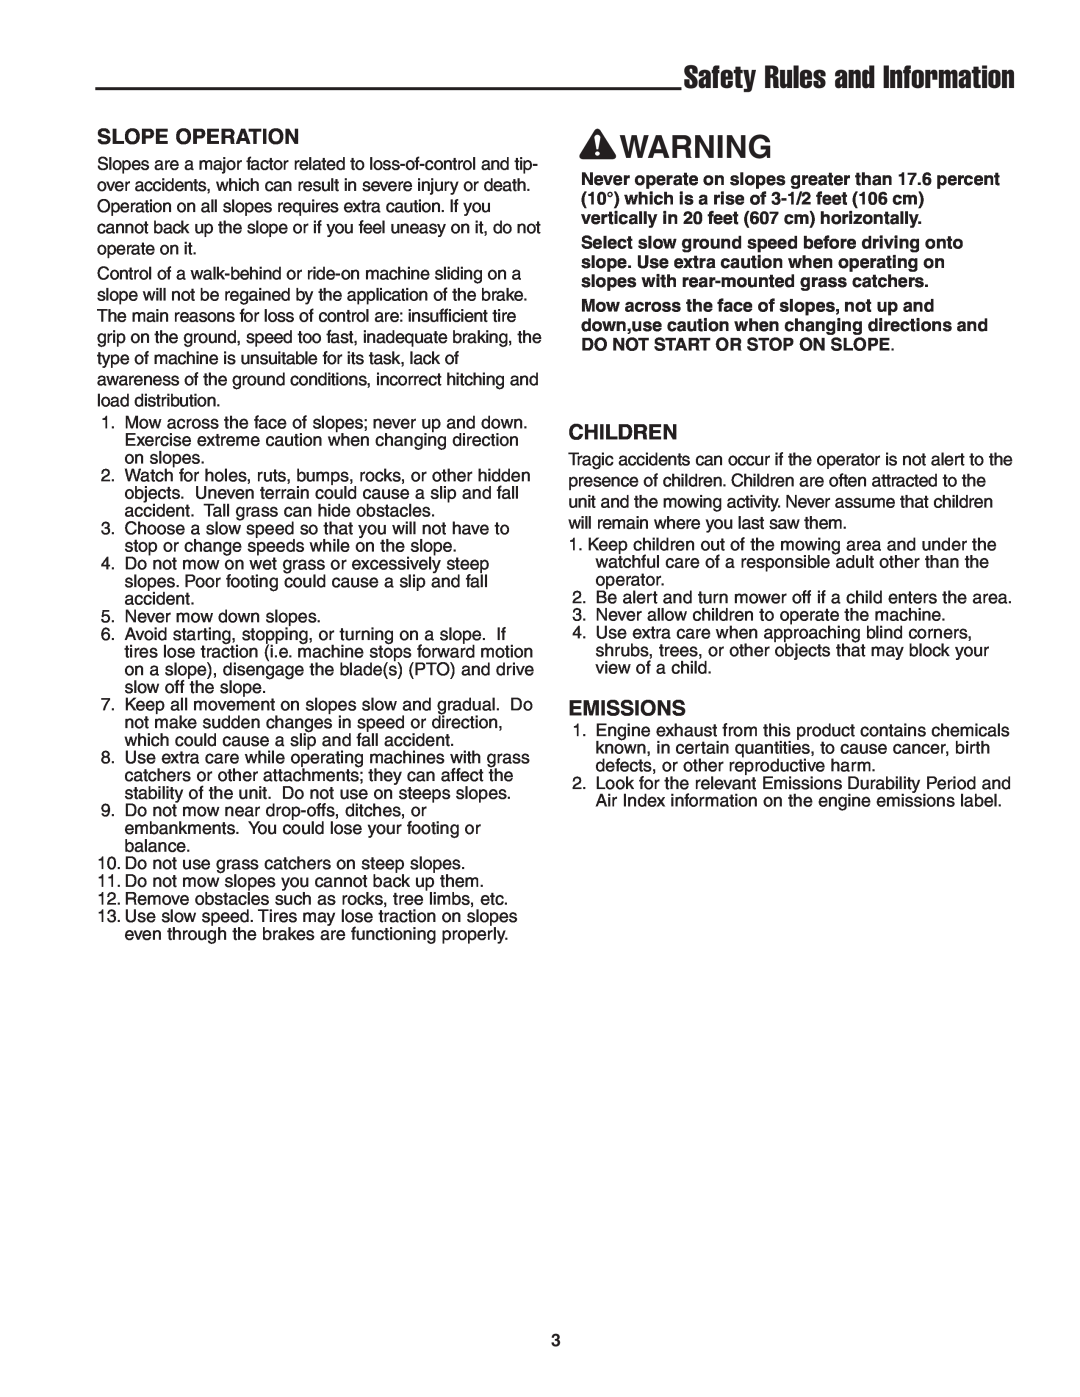 Snapper 13HP manual Safety Rules and Information, Slope Operation, Children, Emissions 